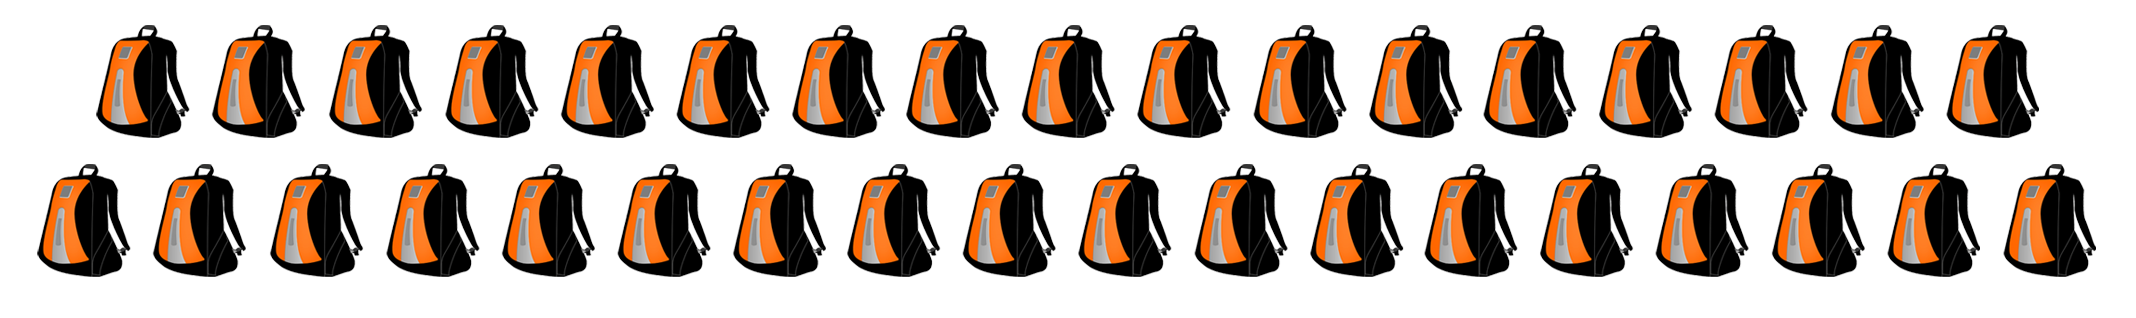 backpacks-graphic